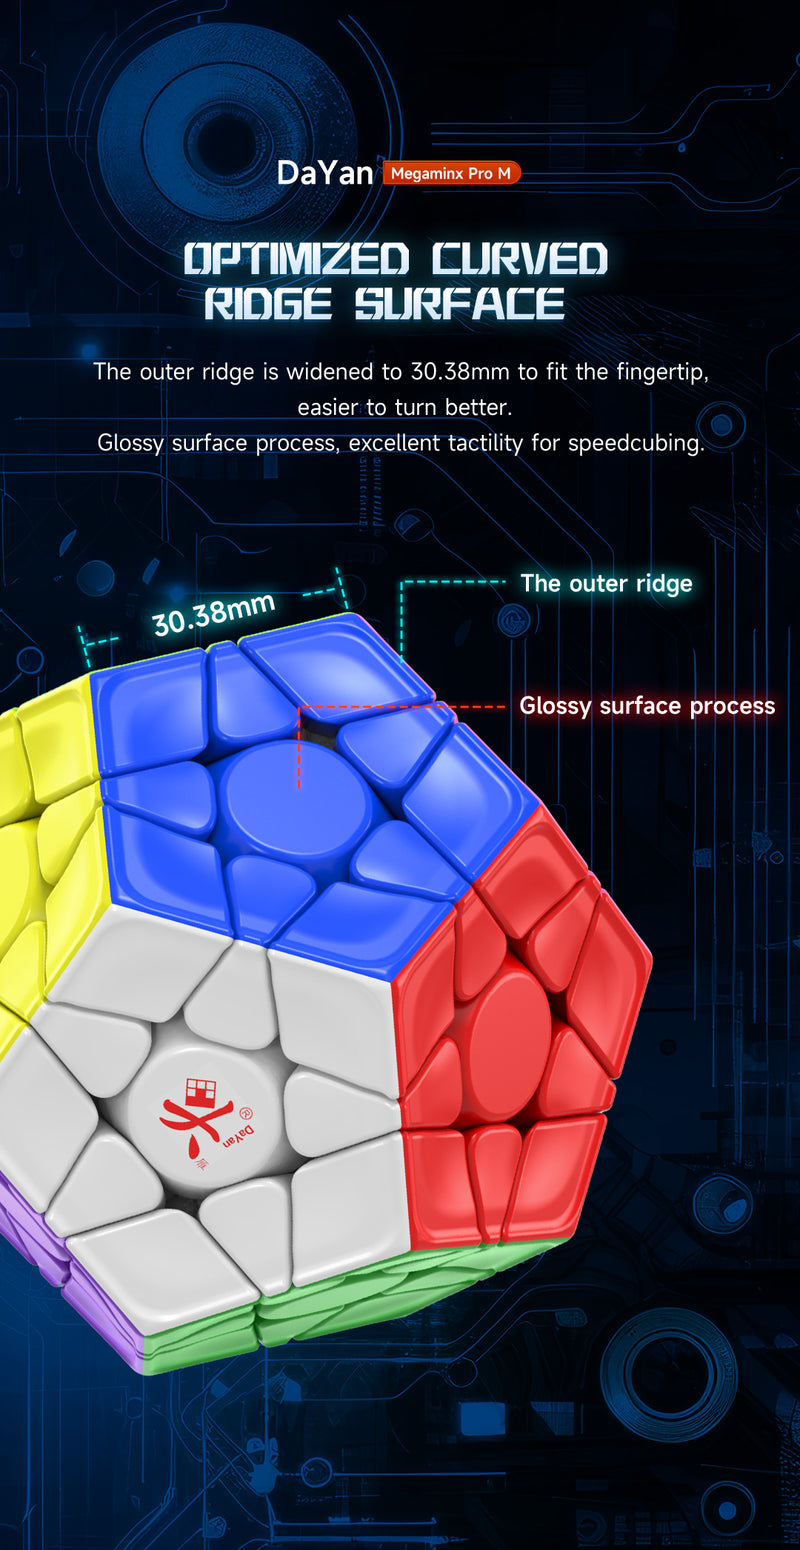 DaYan Megaminx Pro M dimensions surface features